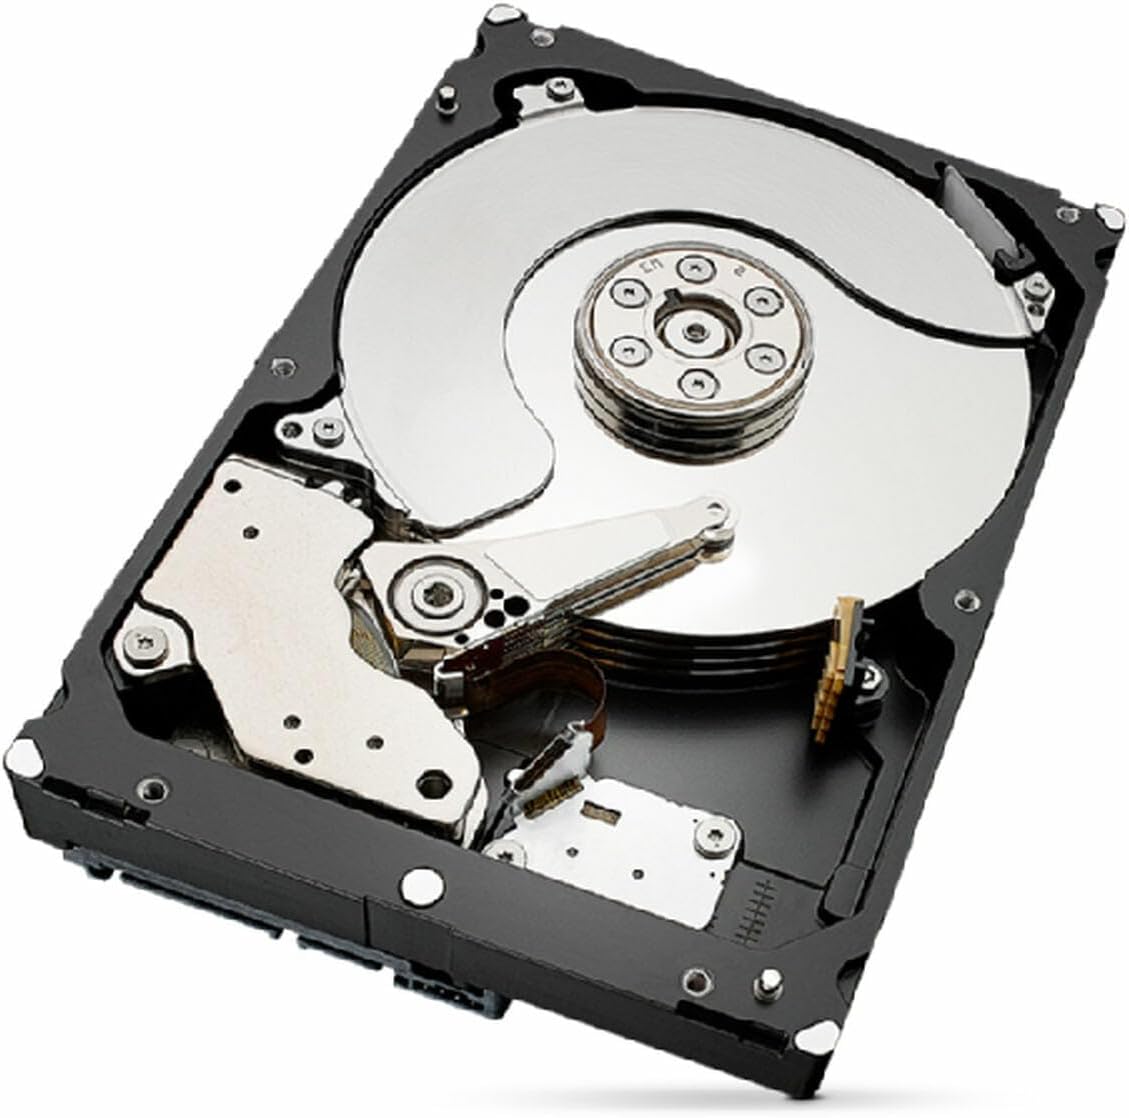 Seagate Ironwolf Pro ST6000NT001 6TB 3.5'' HDD NAS Drives 7200 RPM; SATA 6GB/s Interface; 256MB Cache;550TB/Year; Unlimited Bays